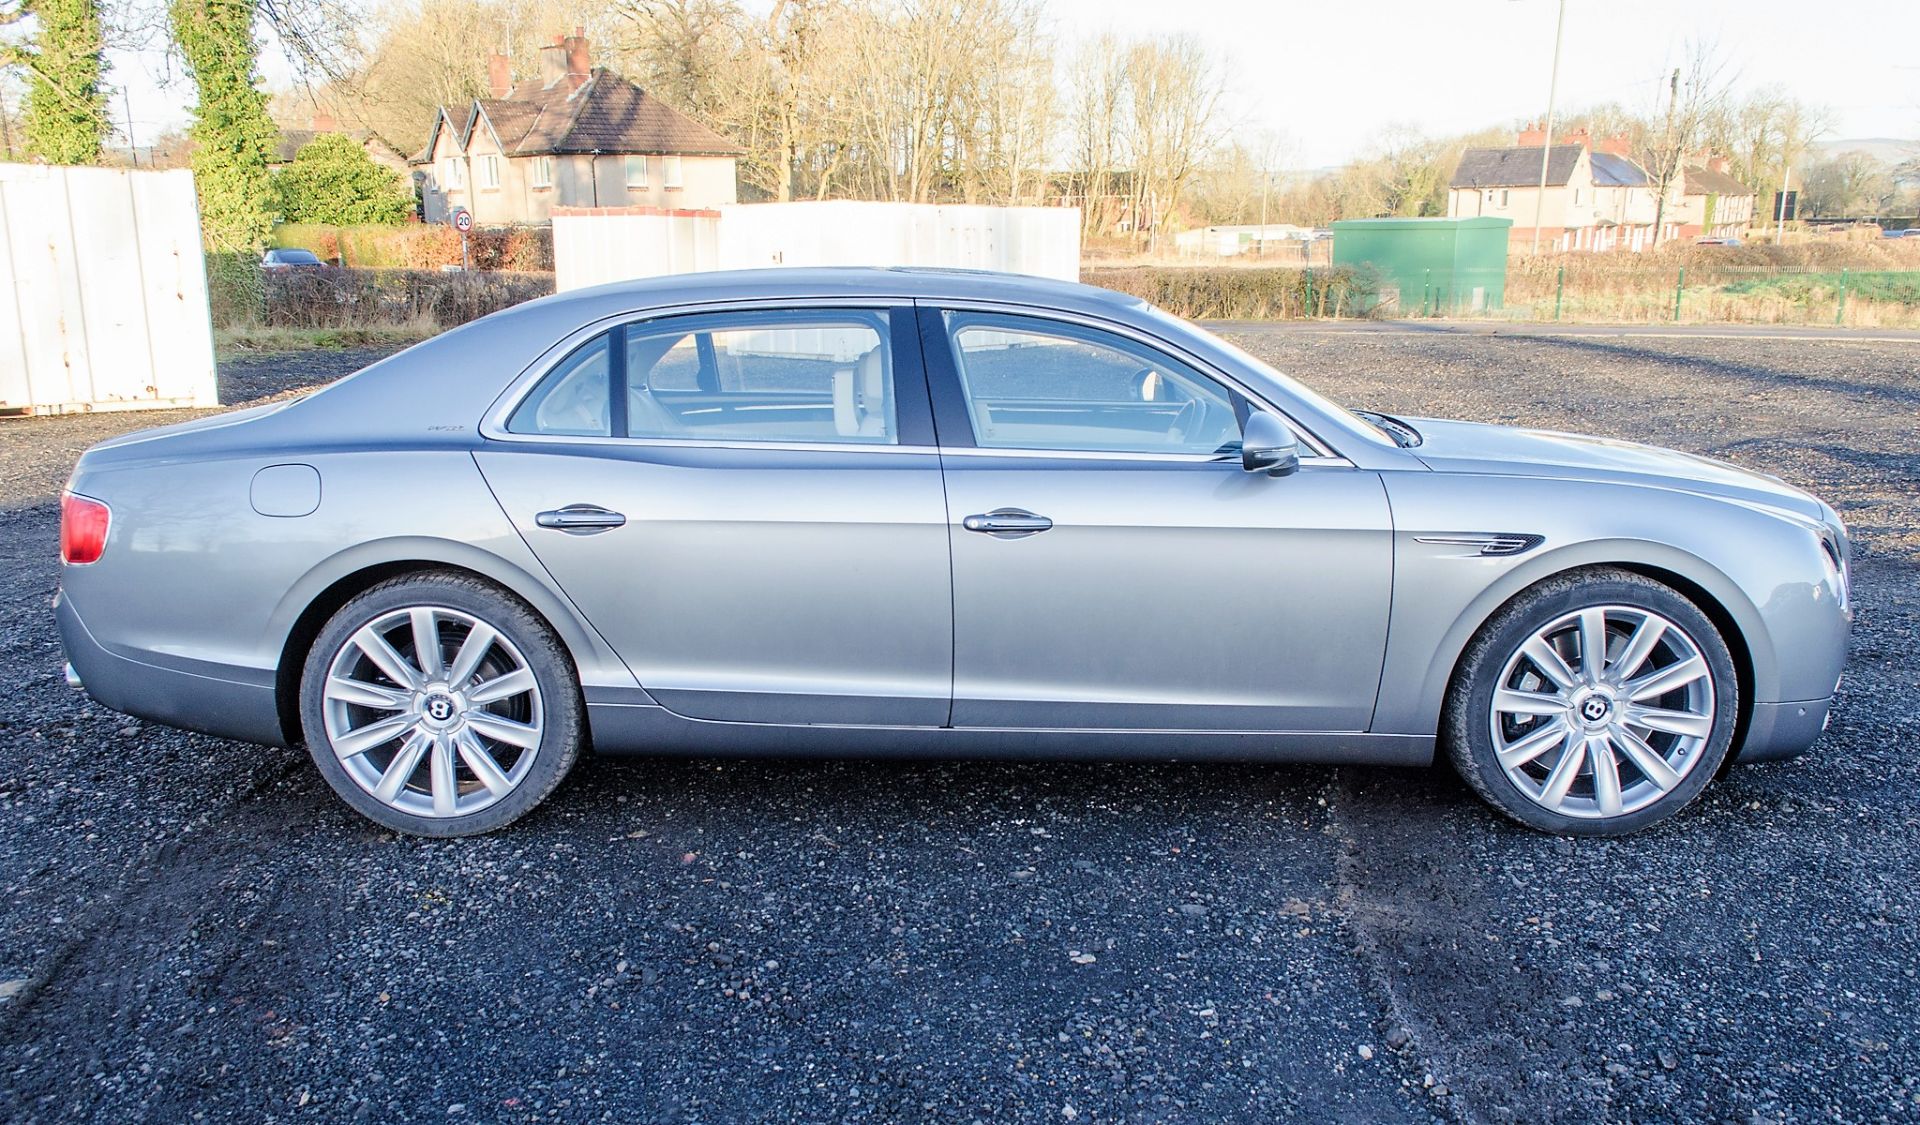 Bentley Flying Spur 6.0 W12 automatic 4 door saloon car Registration Number: MJ63 NHM Date of - Image 12 of 51